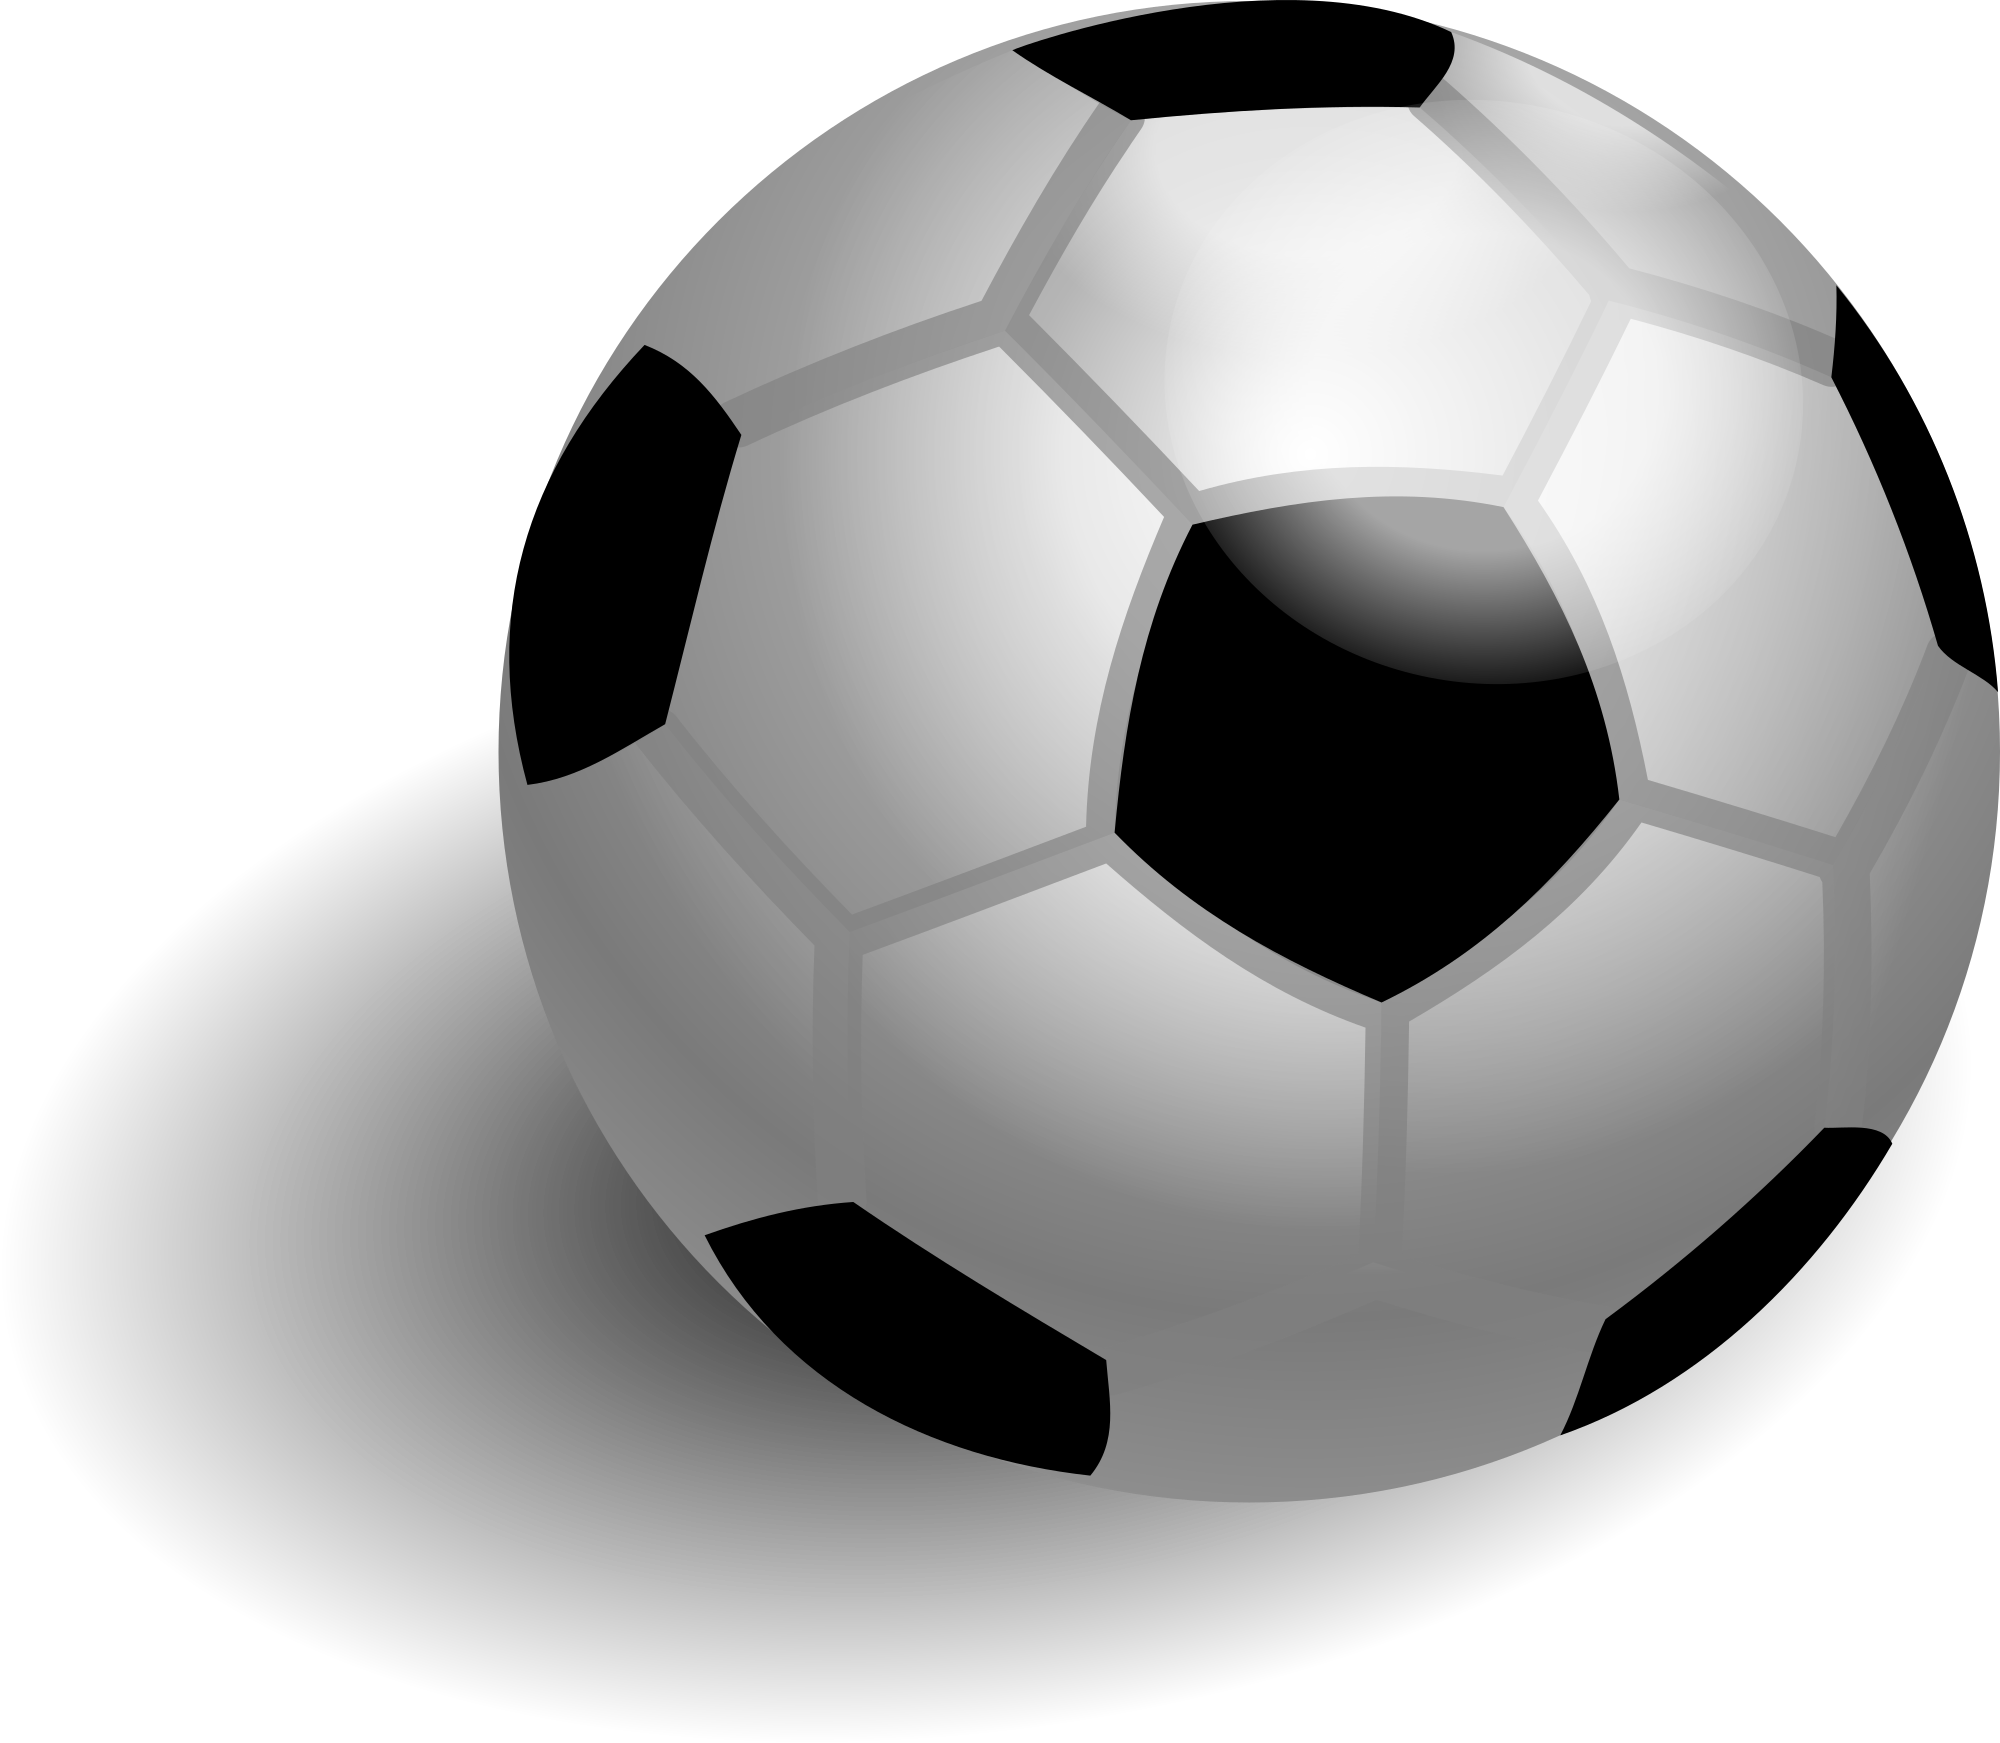 free clipart images of soccer balls - photo #35